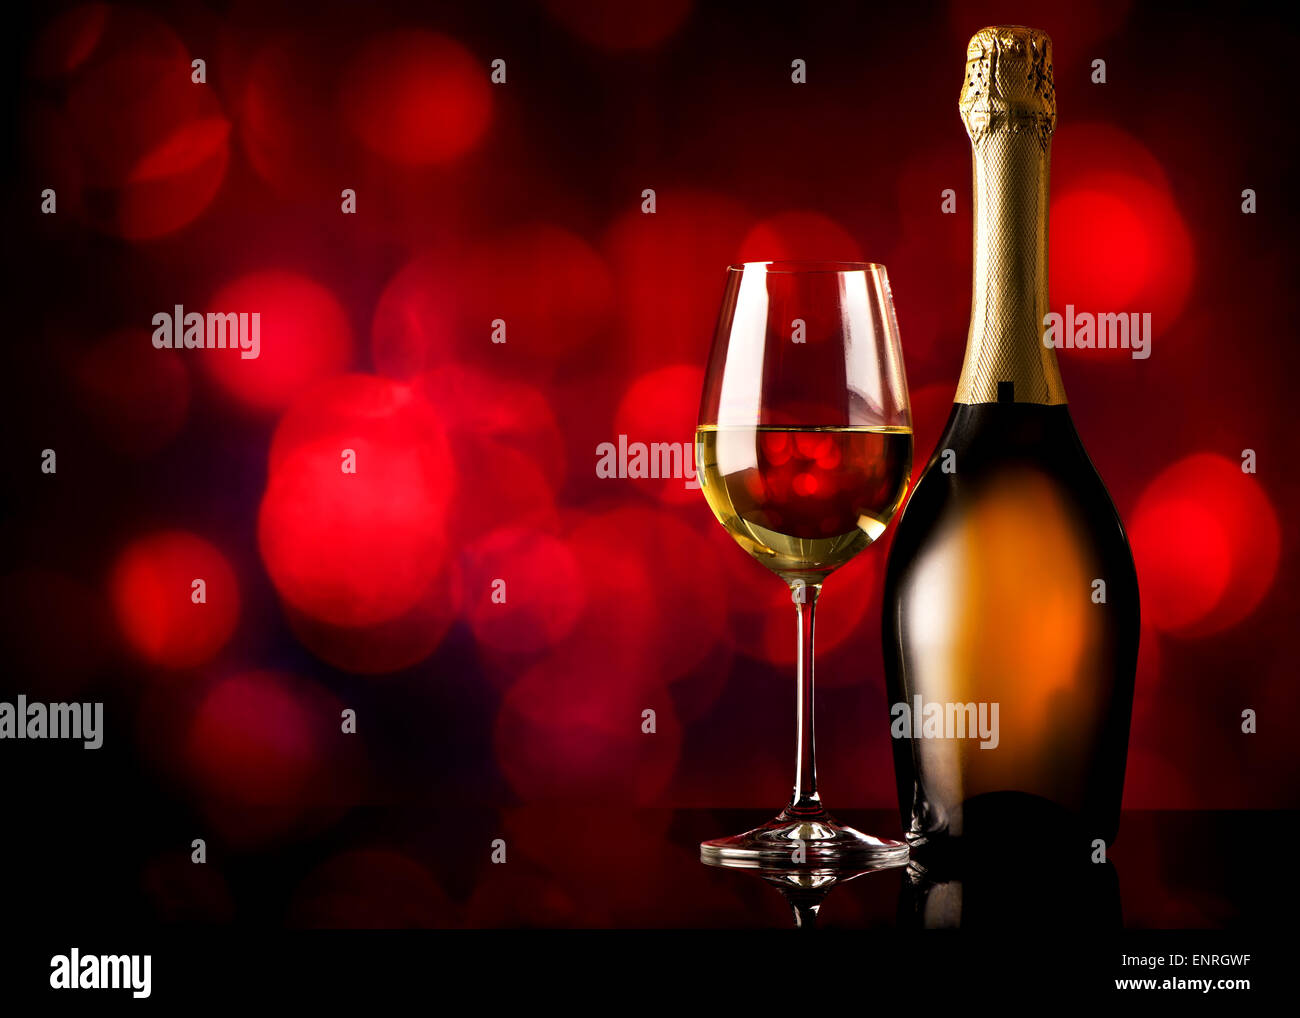 Bottle and glass of white wine on a red background Stock Photo